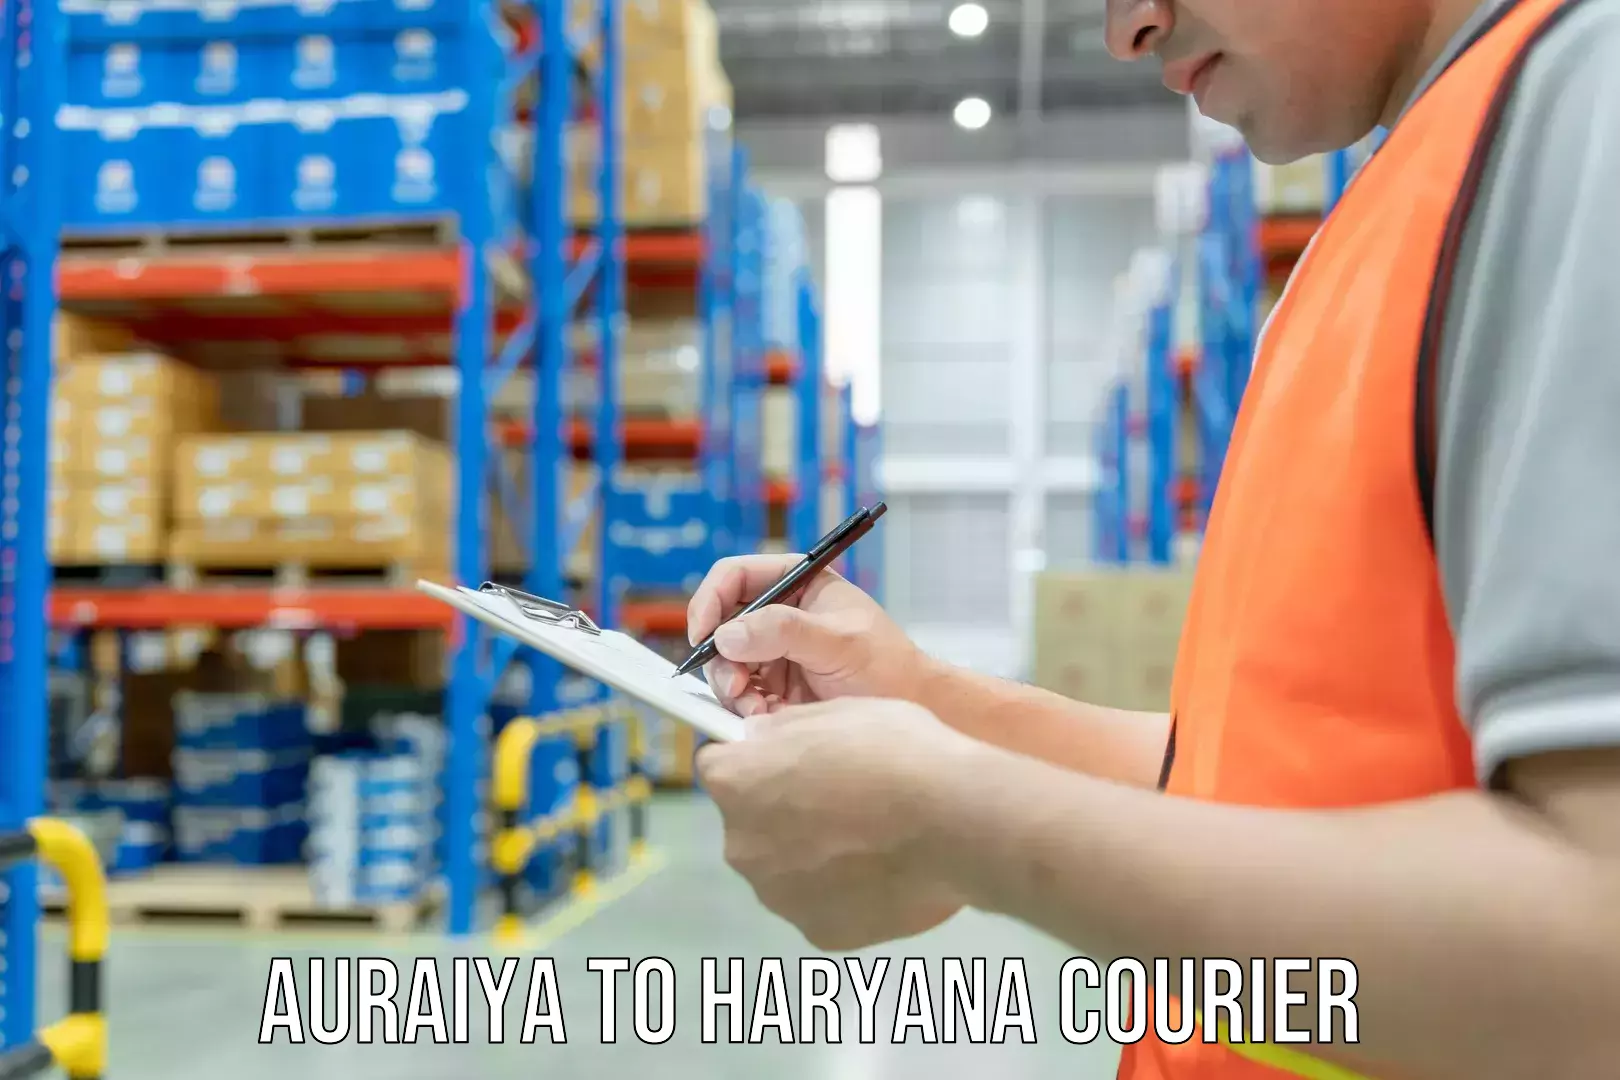 State-of-the-art courier technology Auraiya to Haryana